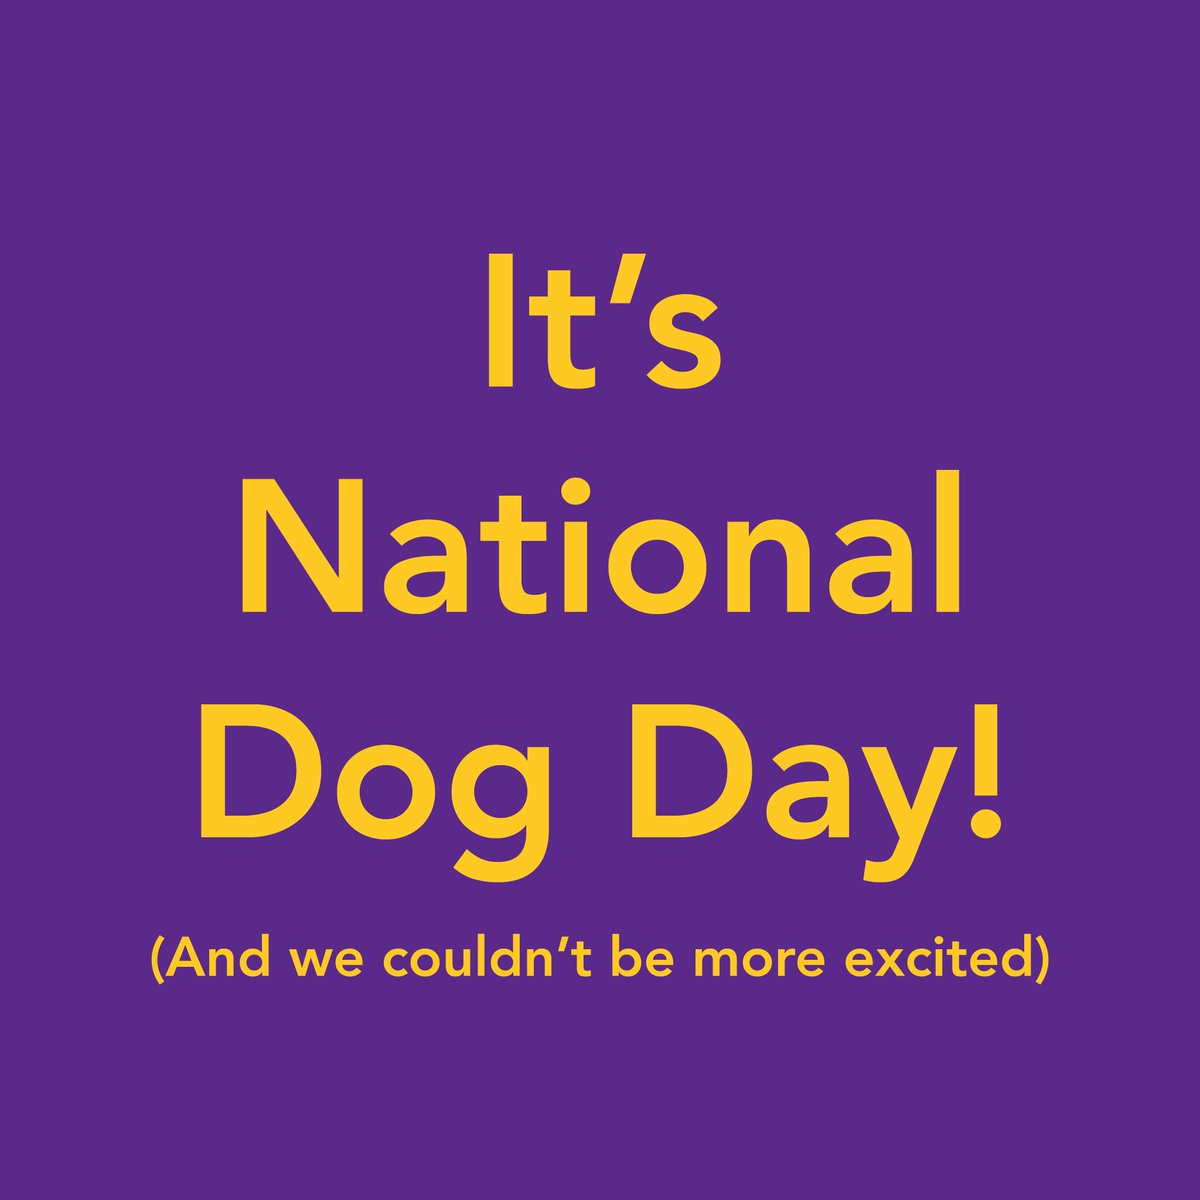 Today is National Dog Day! Someone once said ‘Everyone thinks they have the best dog. And none of them are wrong.’ We tend to agree. So, show us your First Mate, Allied Health Sciences – your pure-bred, your shelter rescue. We want to see them all.